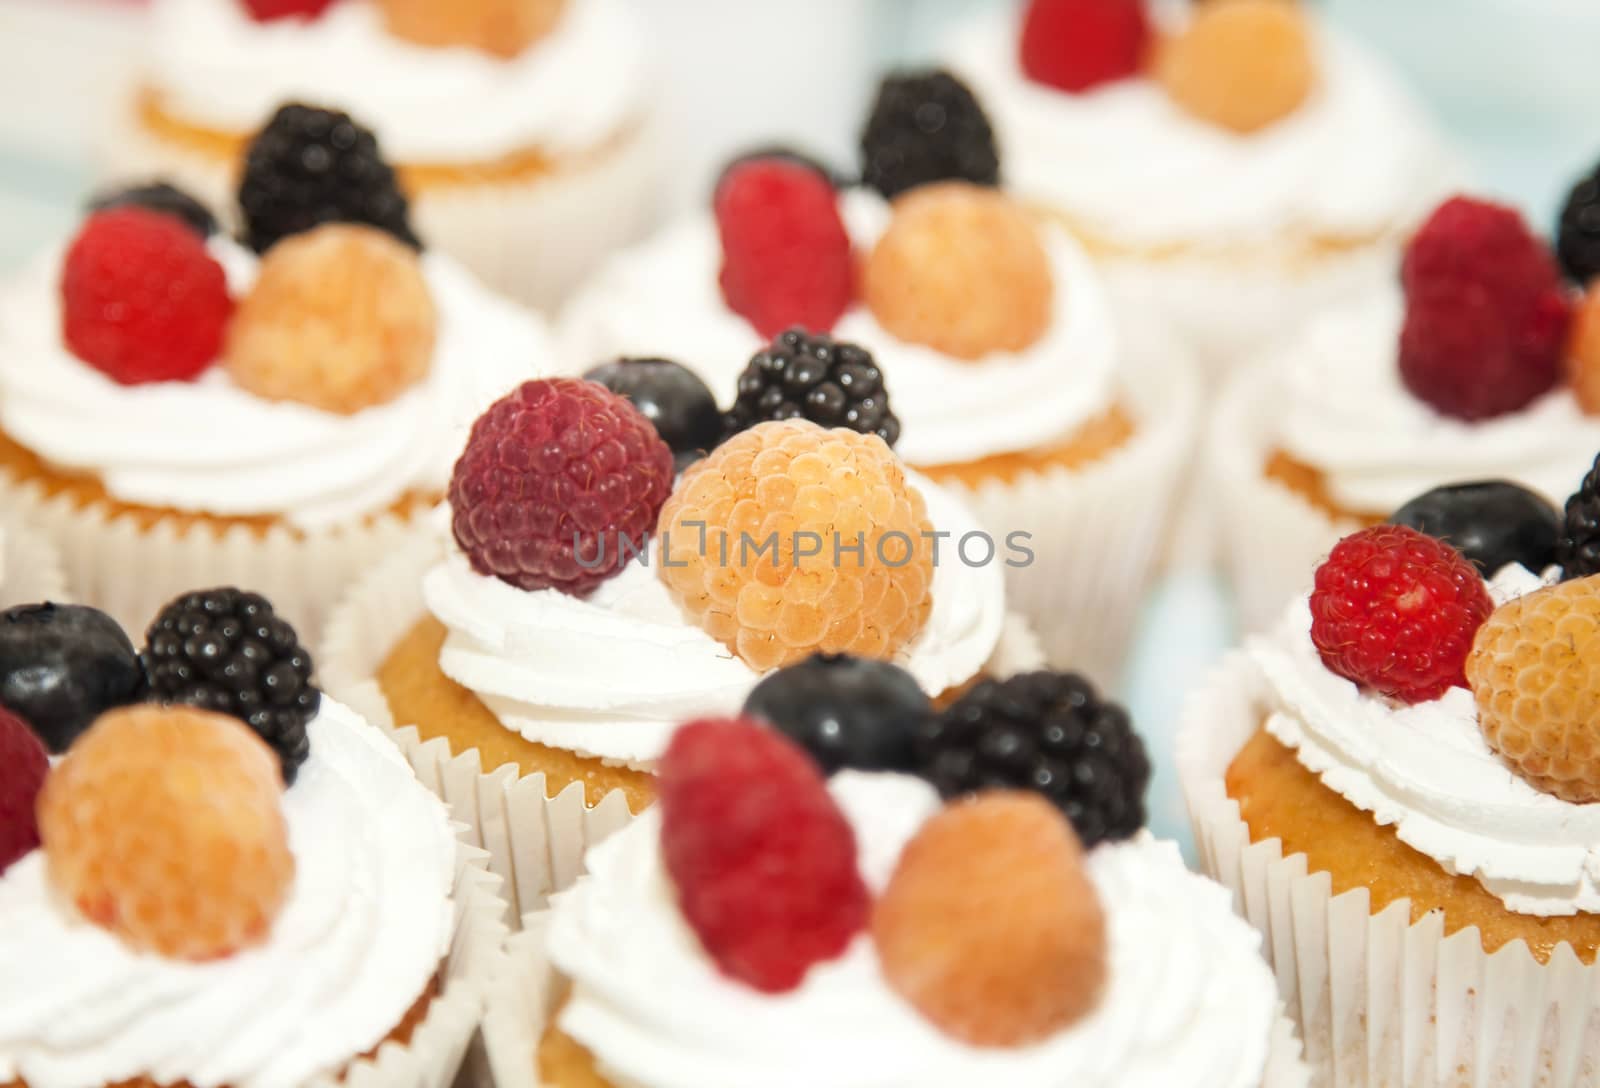 Cupcakes with white cream and berries